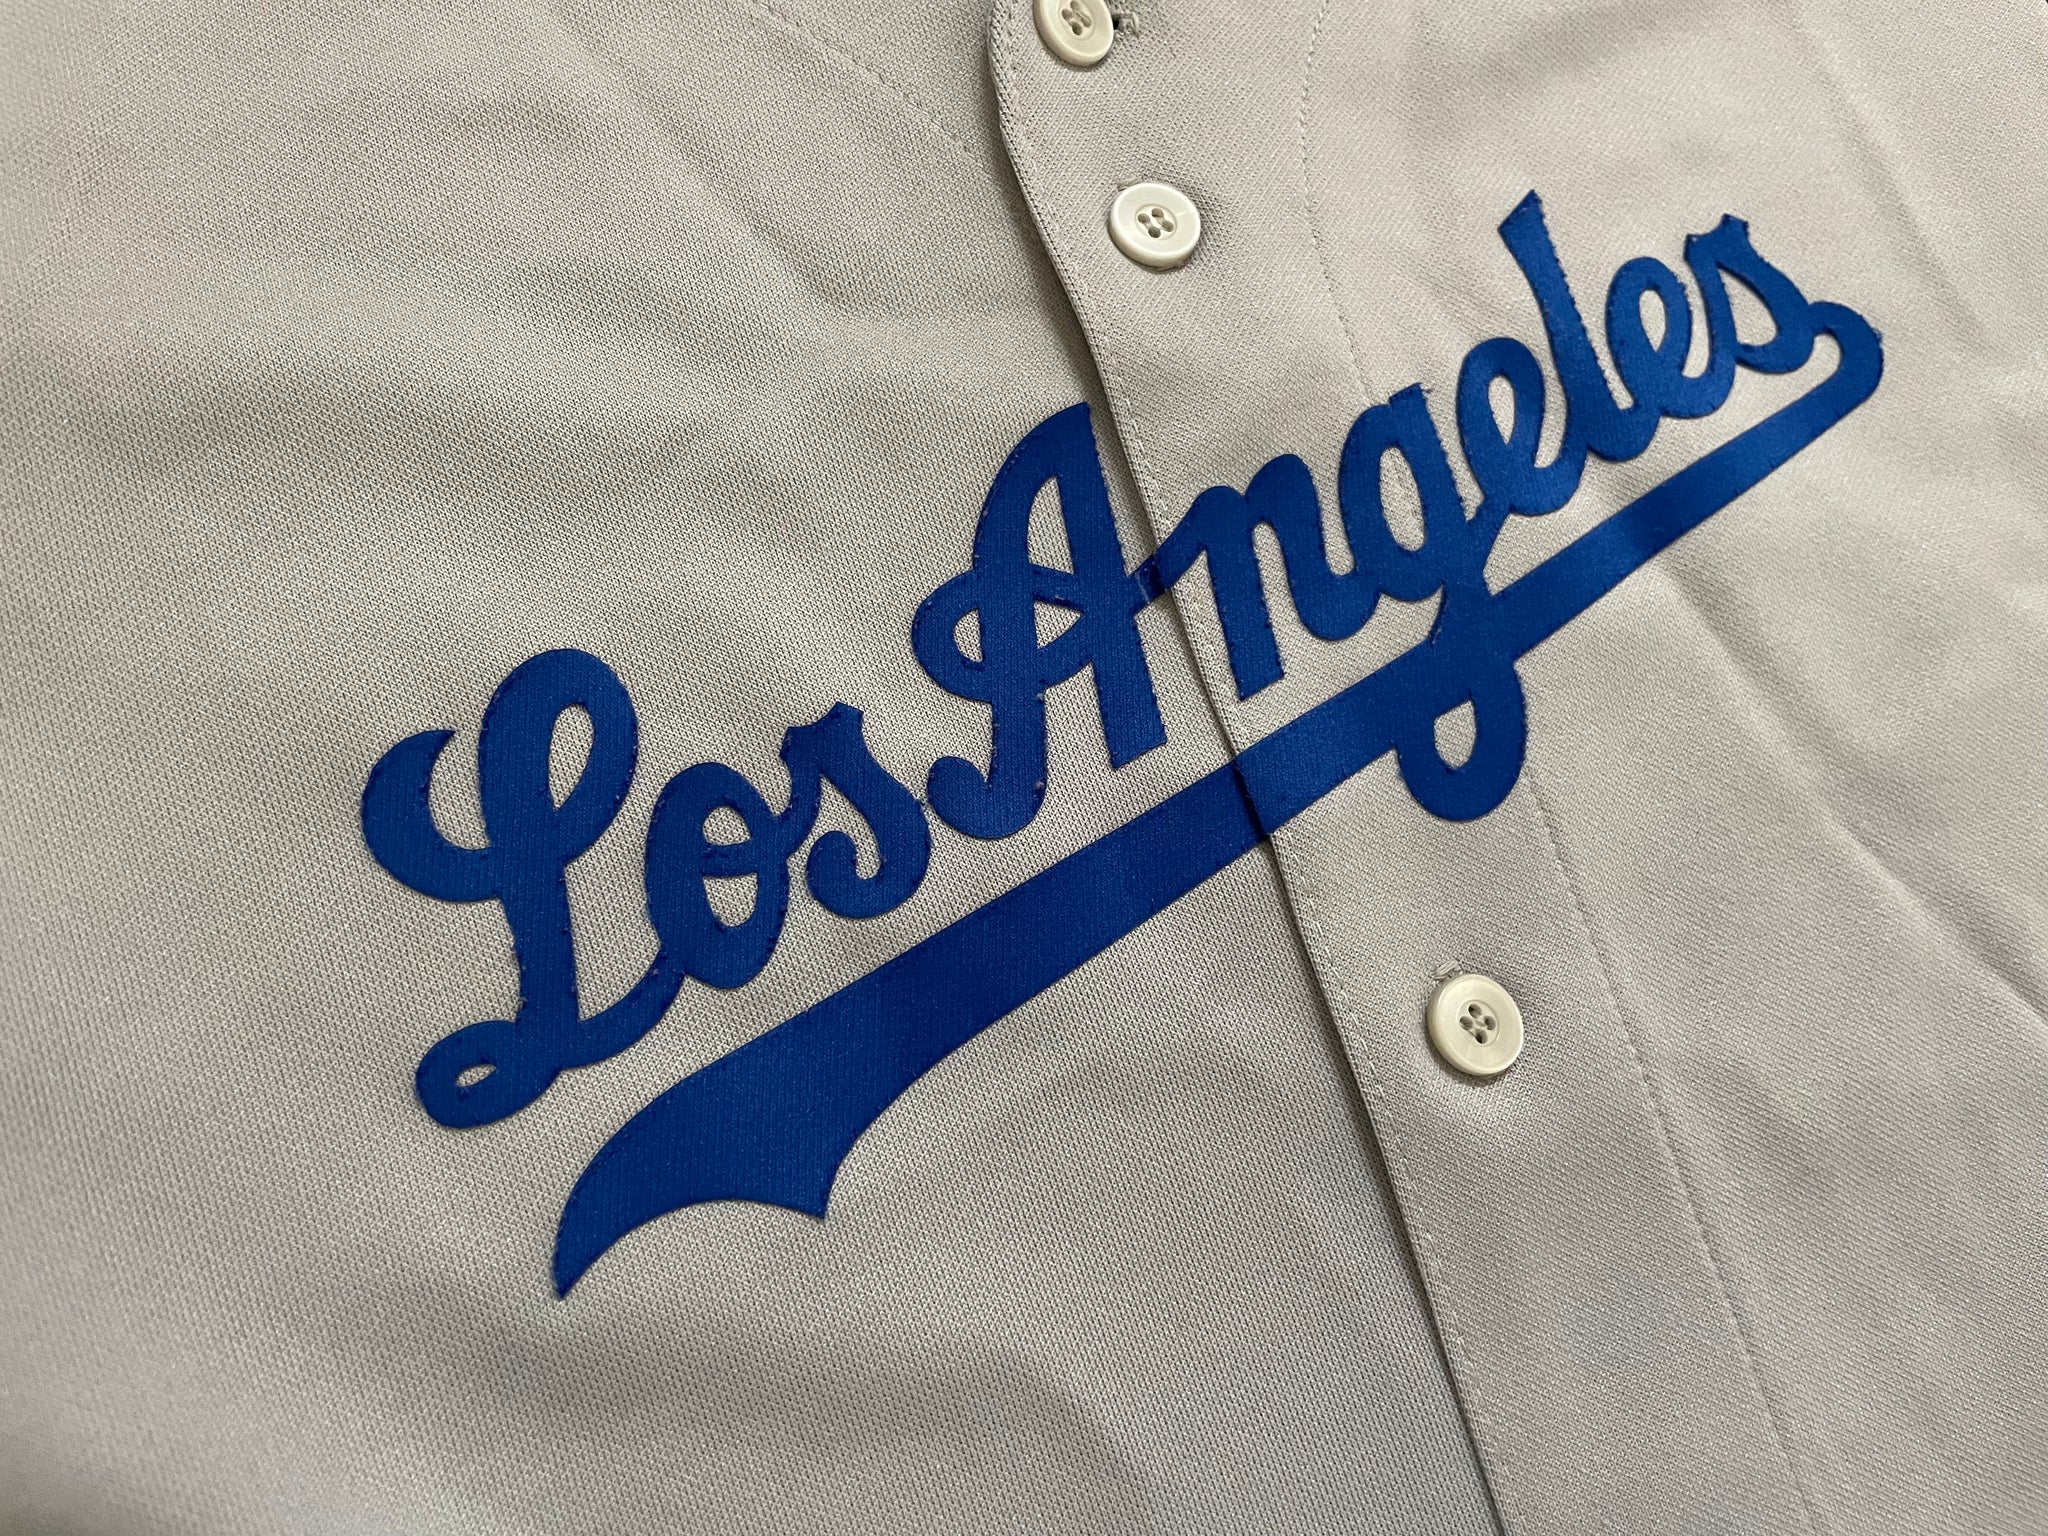 majestic cool base dodgers jersey